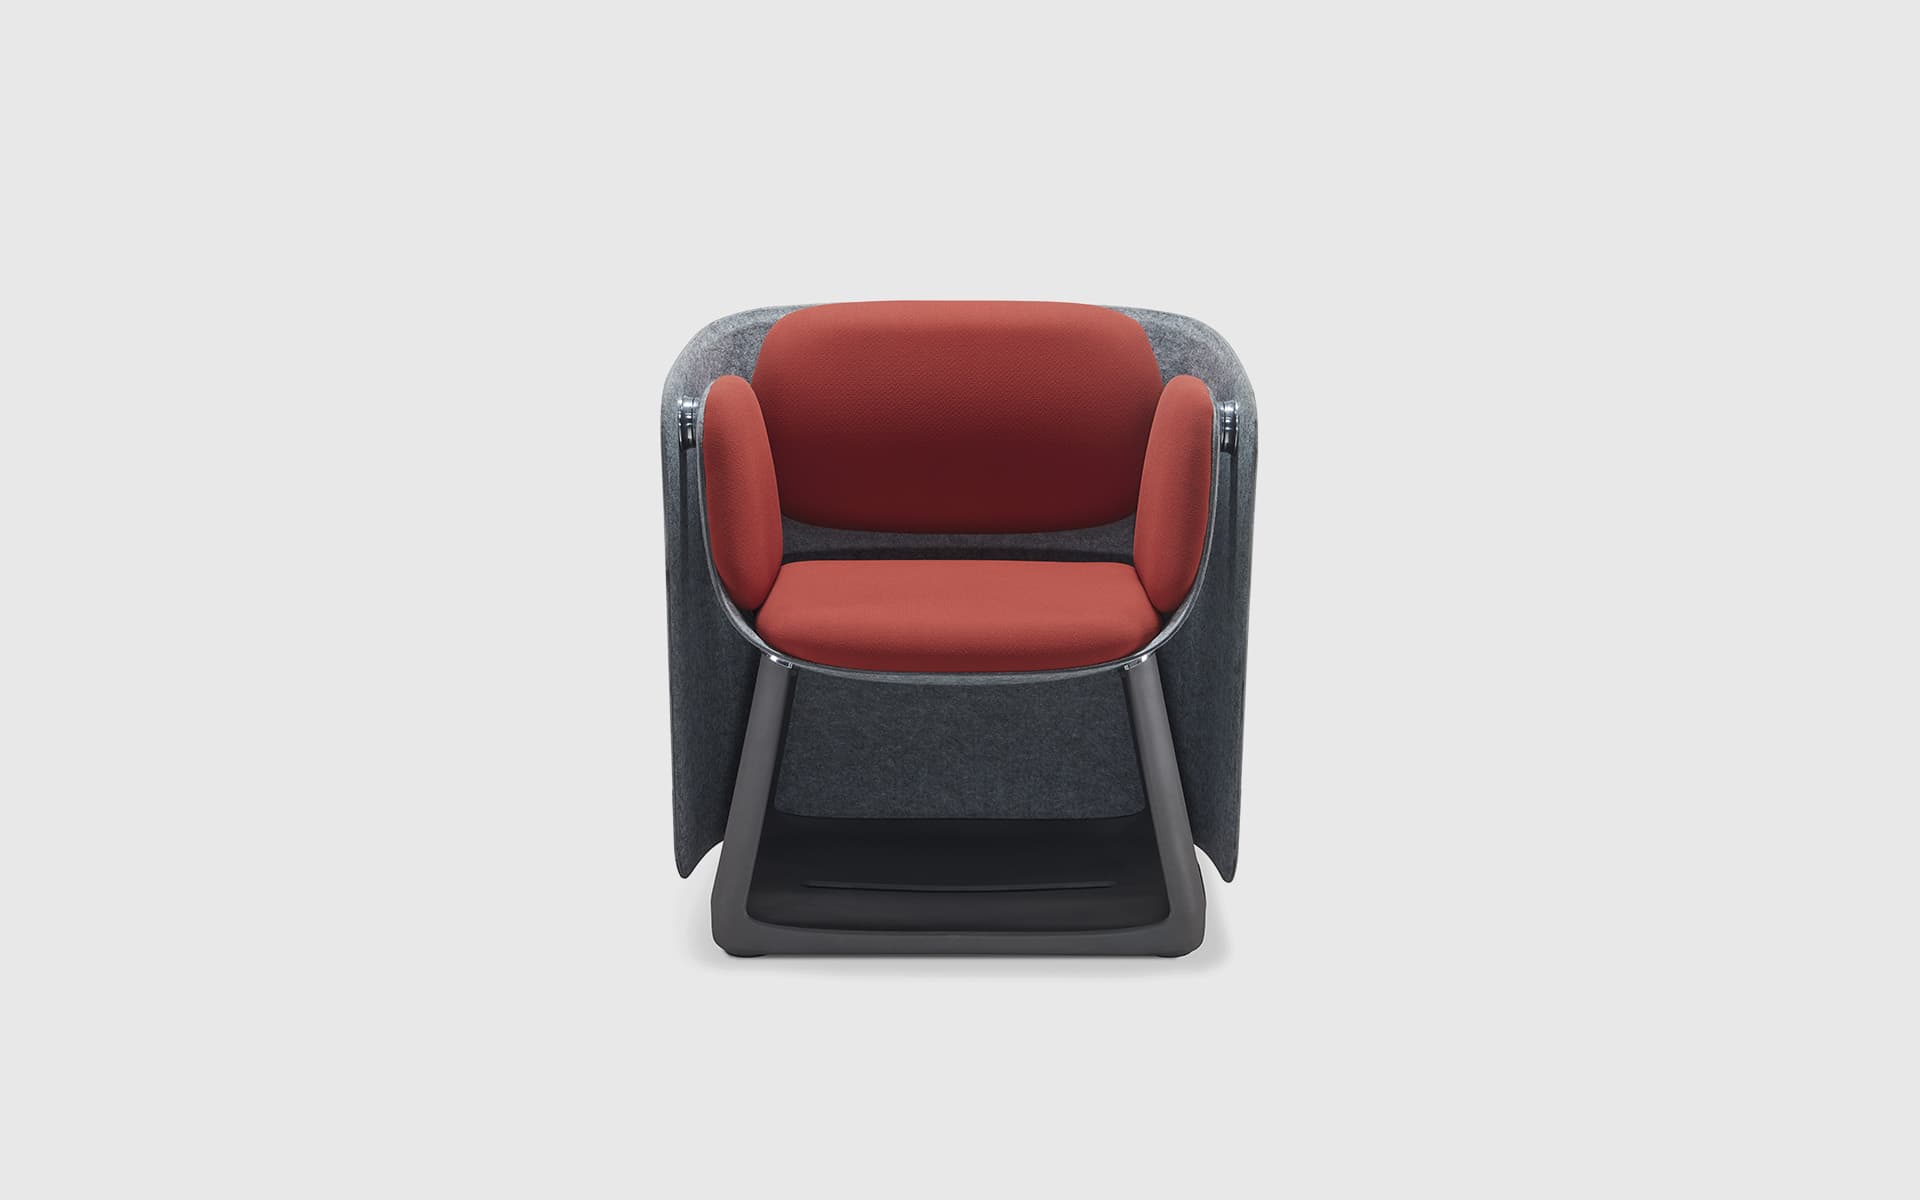 The Sunon UF office chair by ITO Design in grey and red